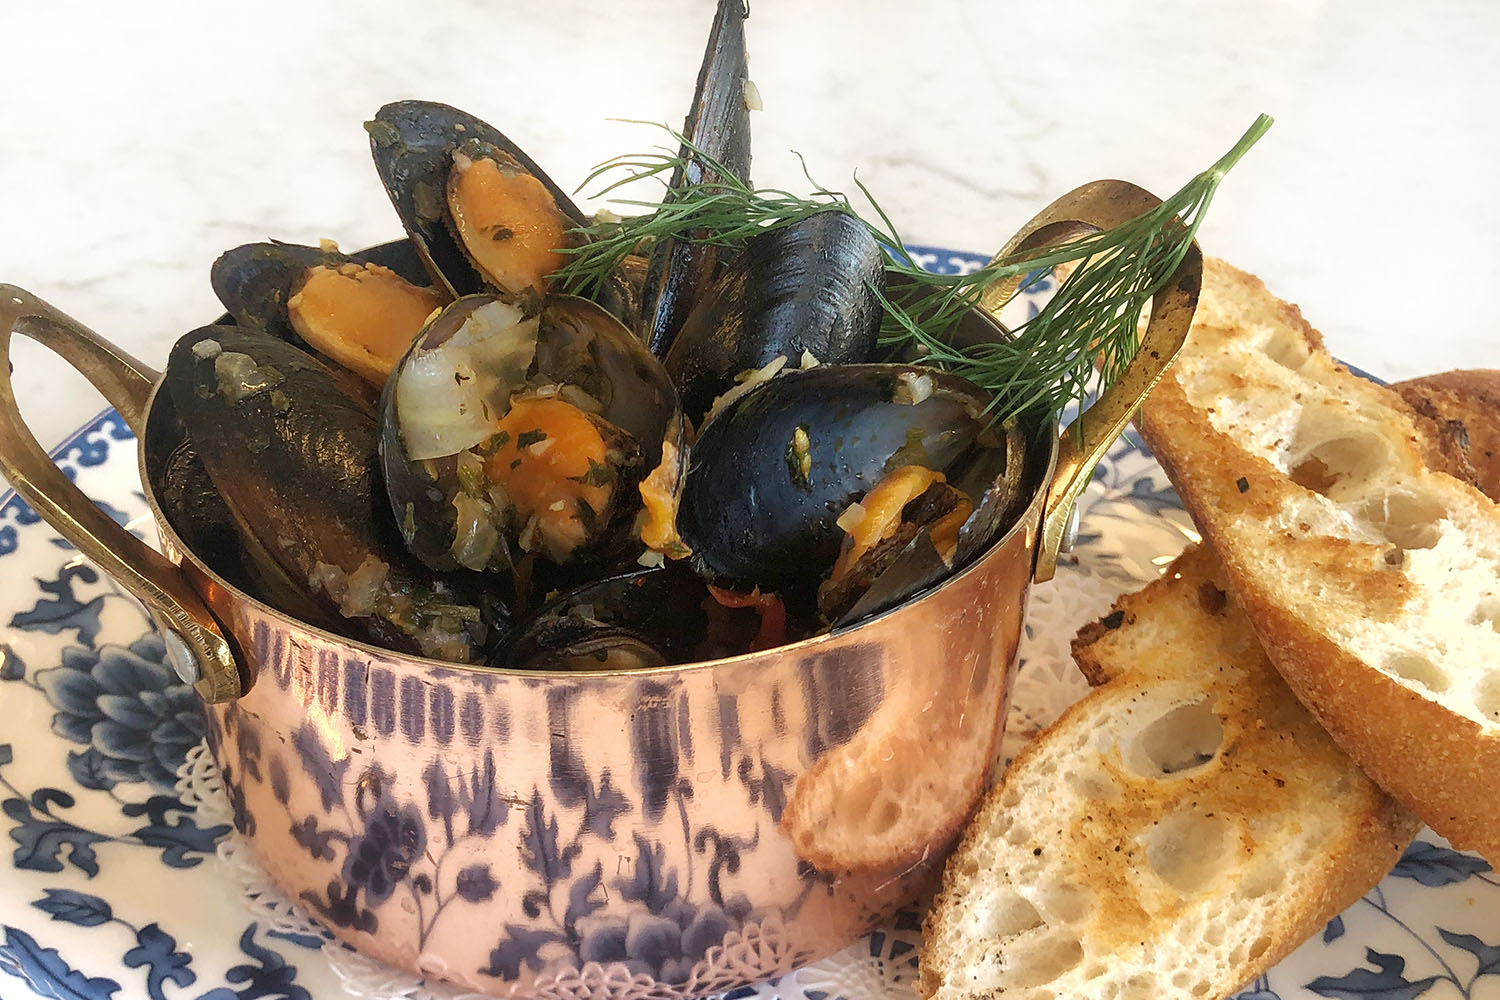 https://www.themanual.com/wp-content/uploads/sites/9/2020/04/simple-rose-mussels.jpg?fit=800%2C533&p=1